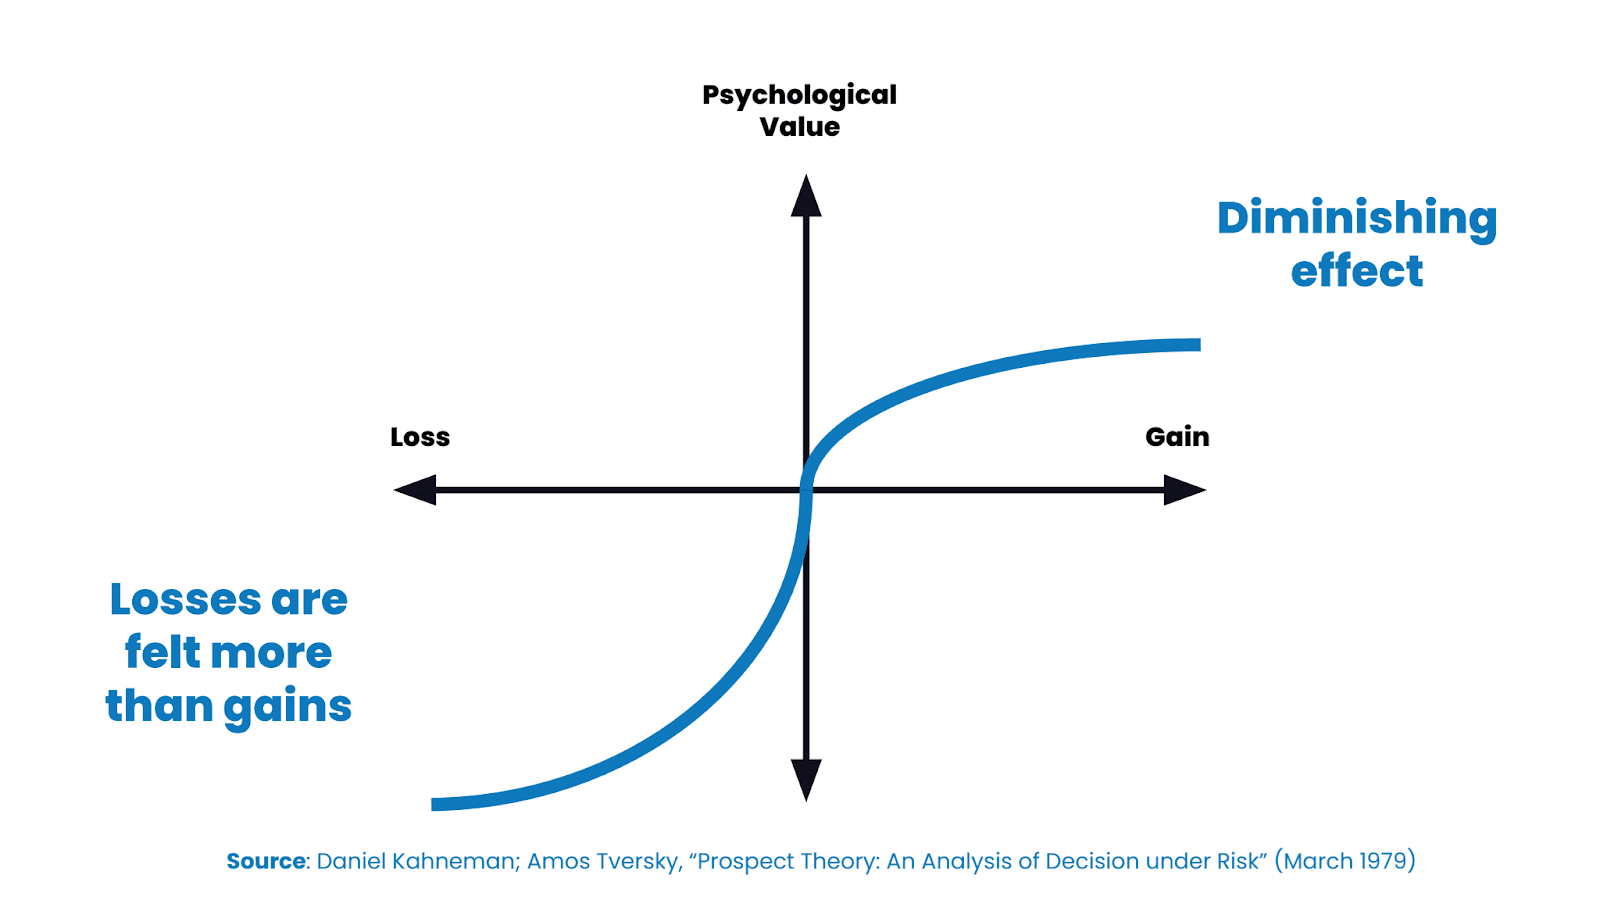 A graph showing the psychological value of losses and gains